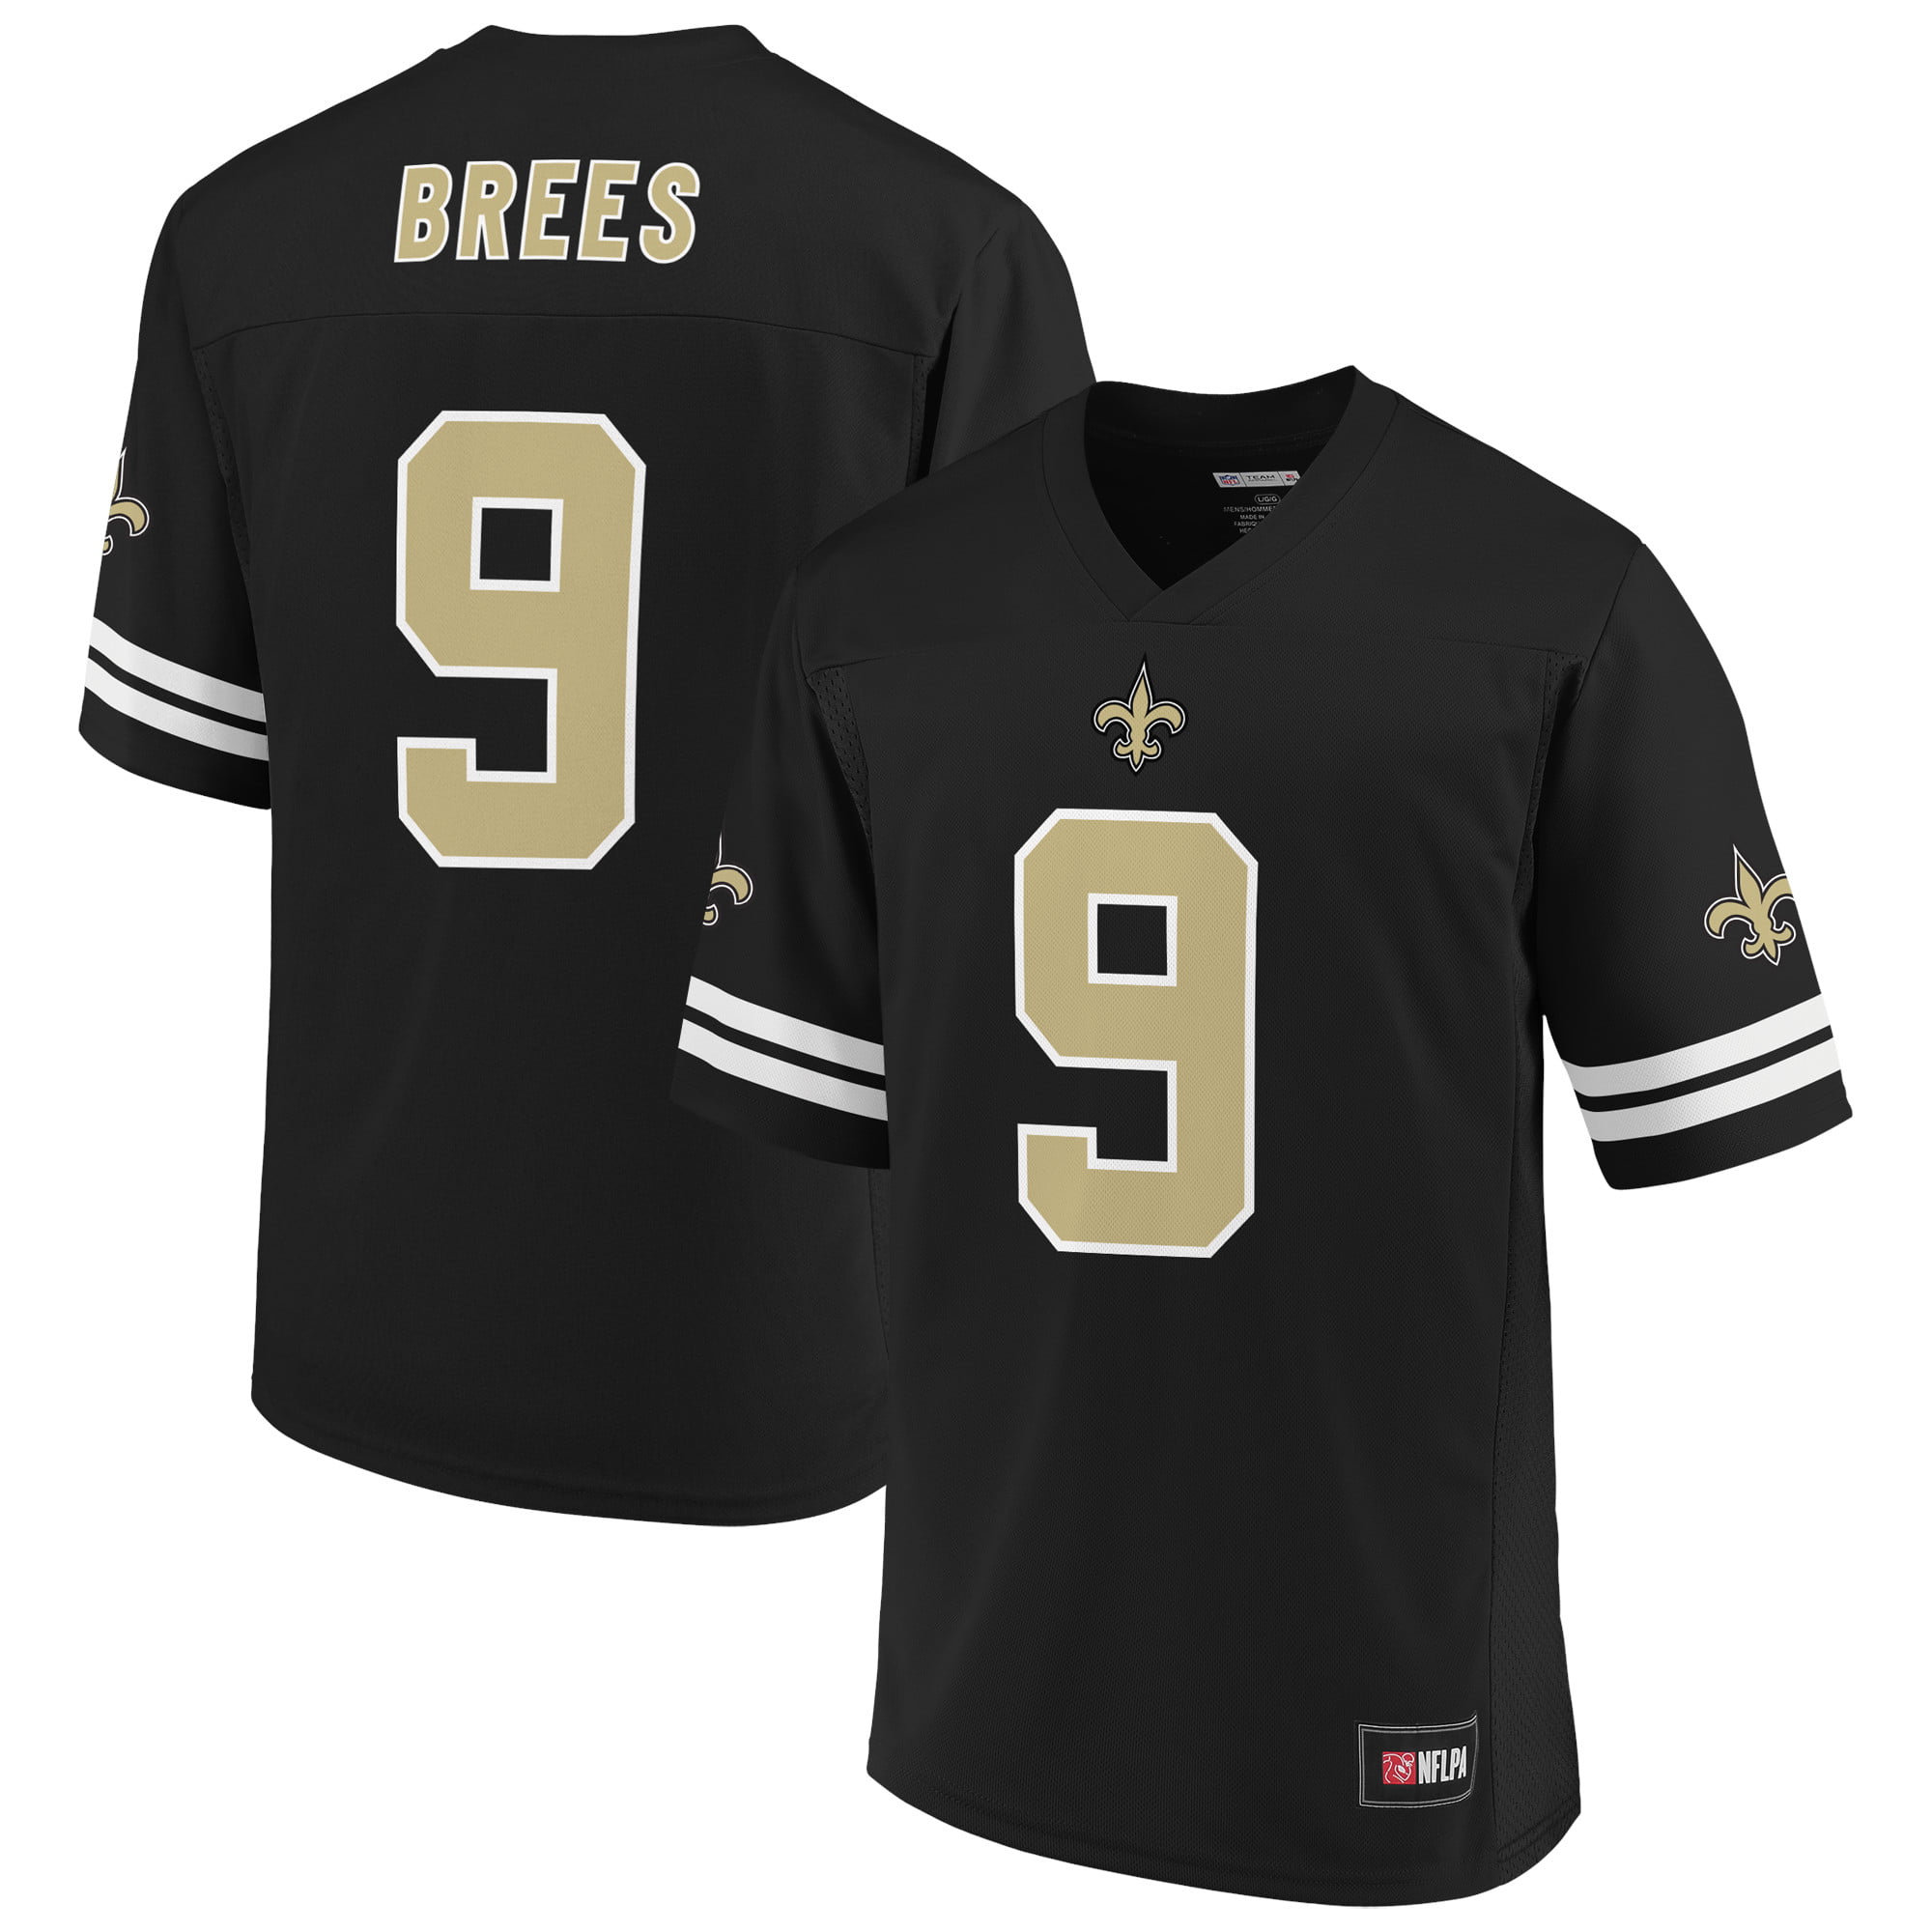 NFL New Orleans Saints (Drew Brees) Men's American Football Home Game Jersey